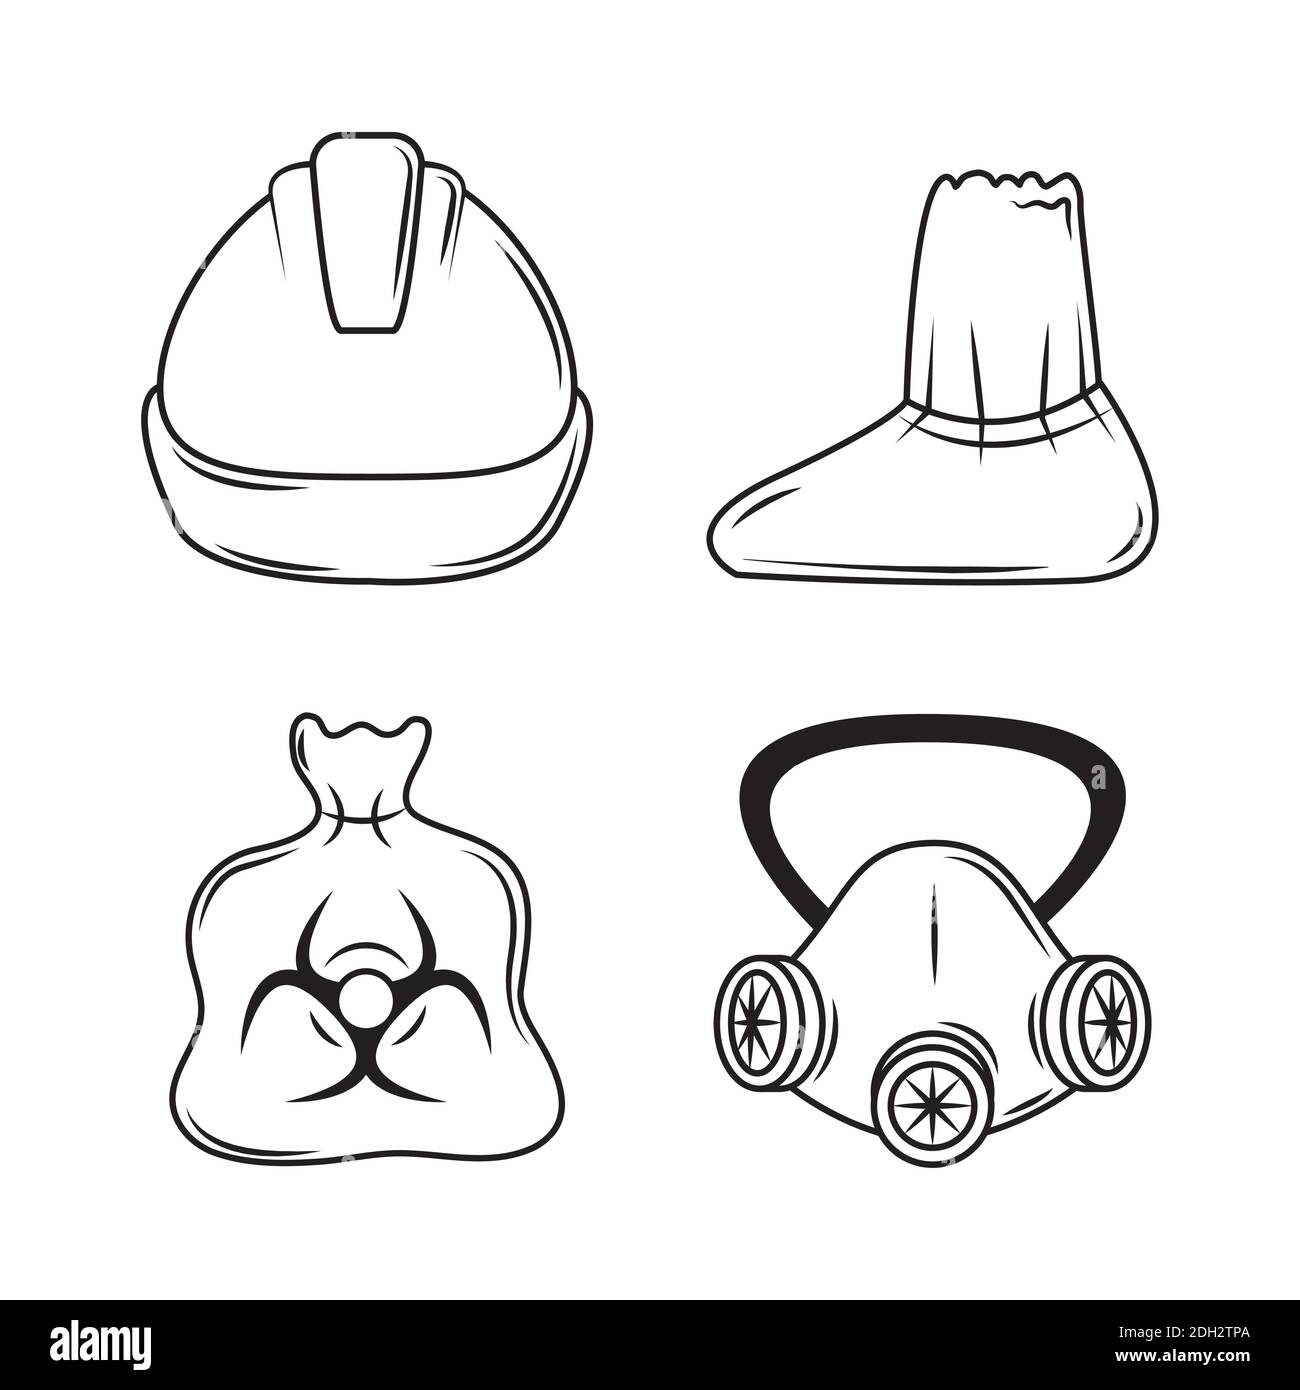 medical wear protective and prevention equipment icons sketch style ...